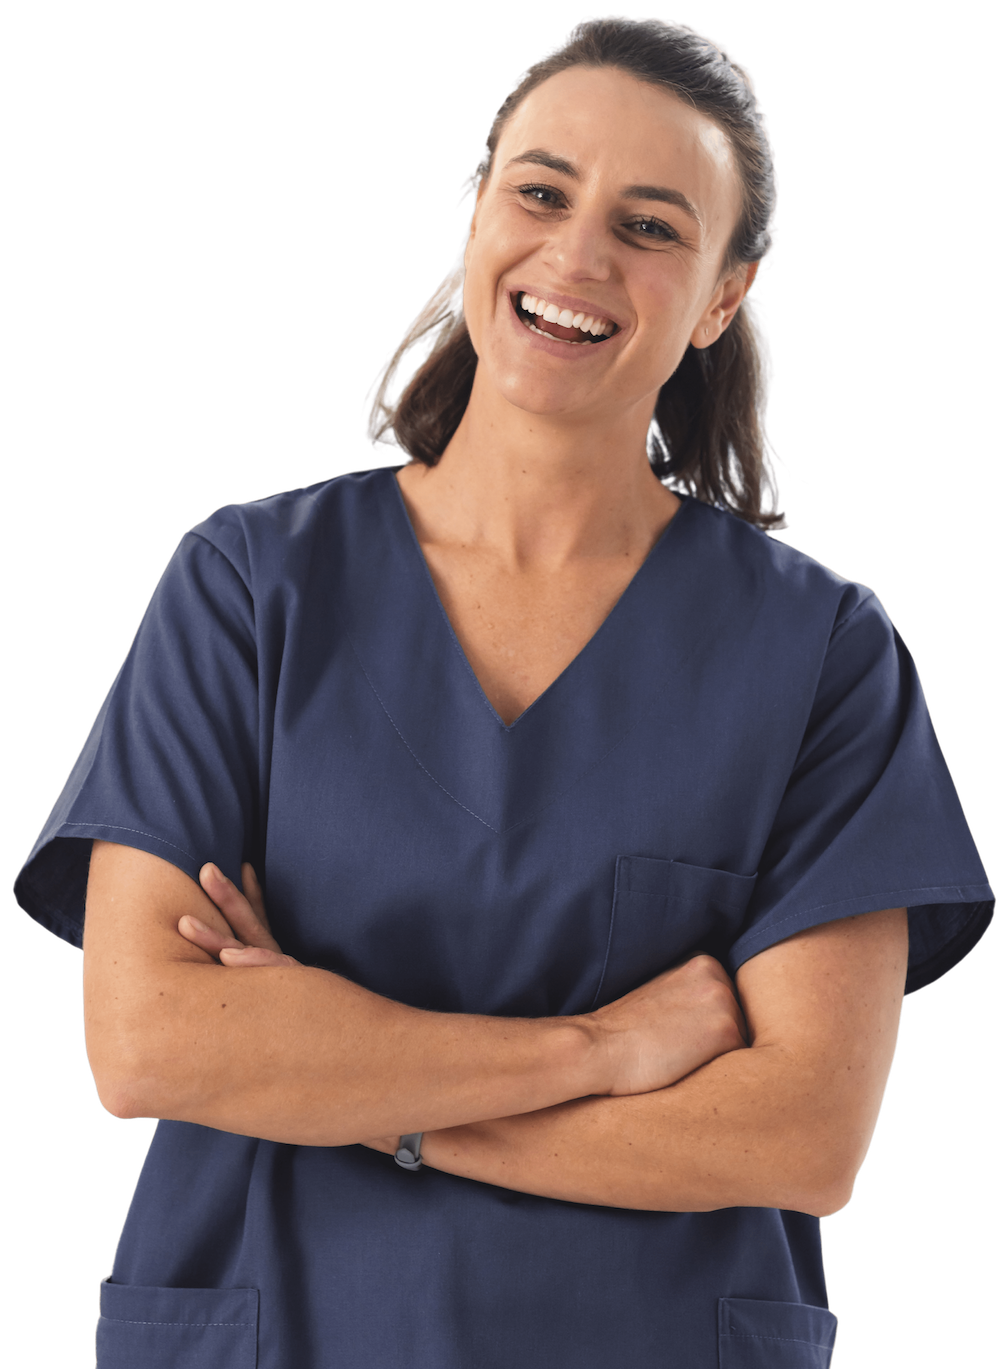 female podiatrist with arms crossed smiling 